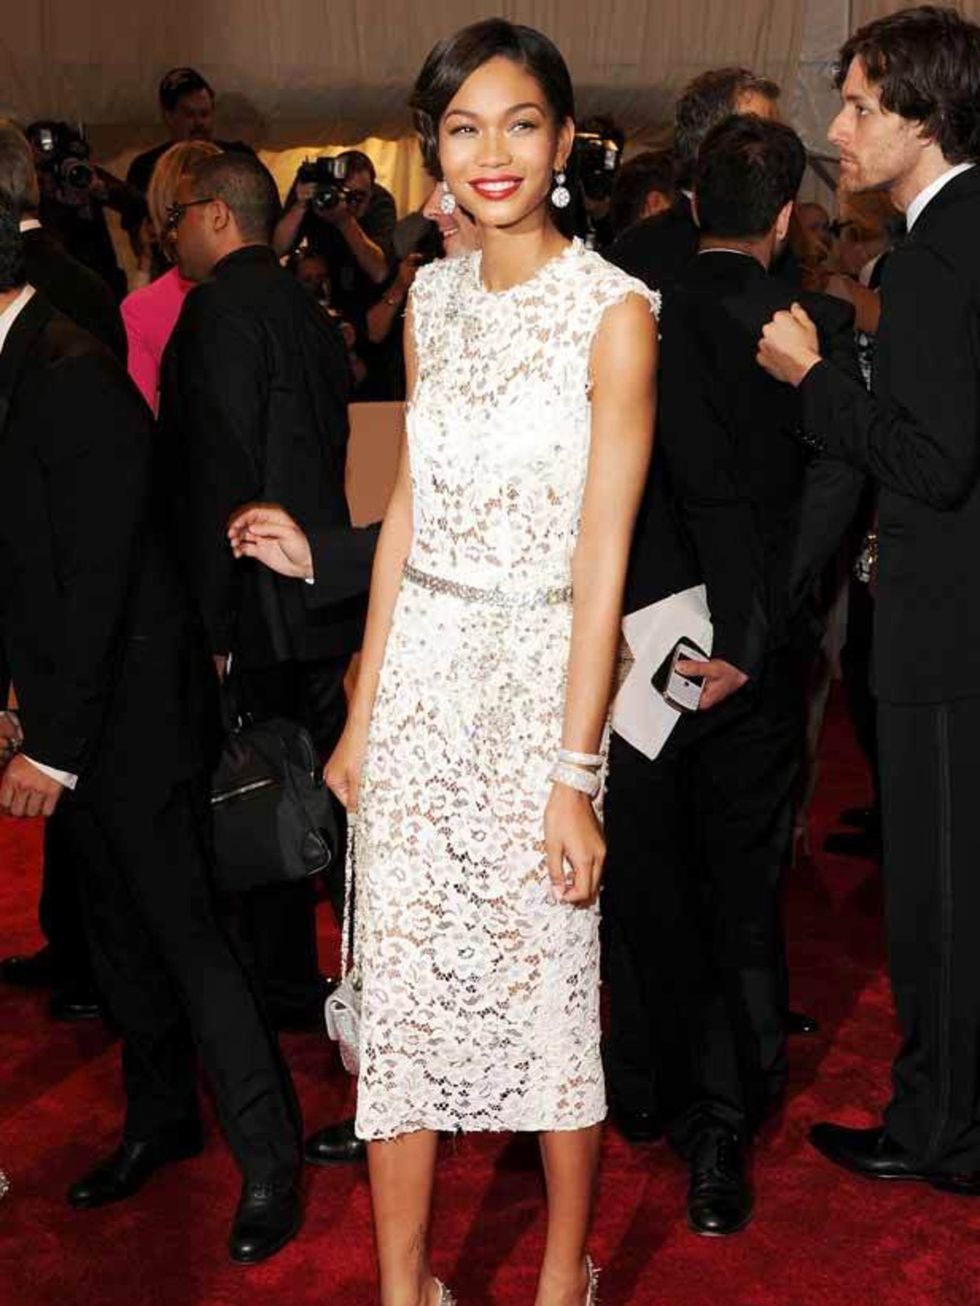 <p>Chanel Iman wears <a href="http://www.elleuk.com/catwalk/collections/dolce-gabbana/">Dolce &amp; Gabbana</a>  <a href="http://www.elleuk.com/starstyle/celebrity-trends/(section)/everyone-s-wearing-white-lace">white lace</a> for the MET Ball, 2 May 2011